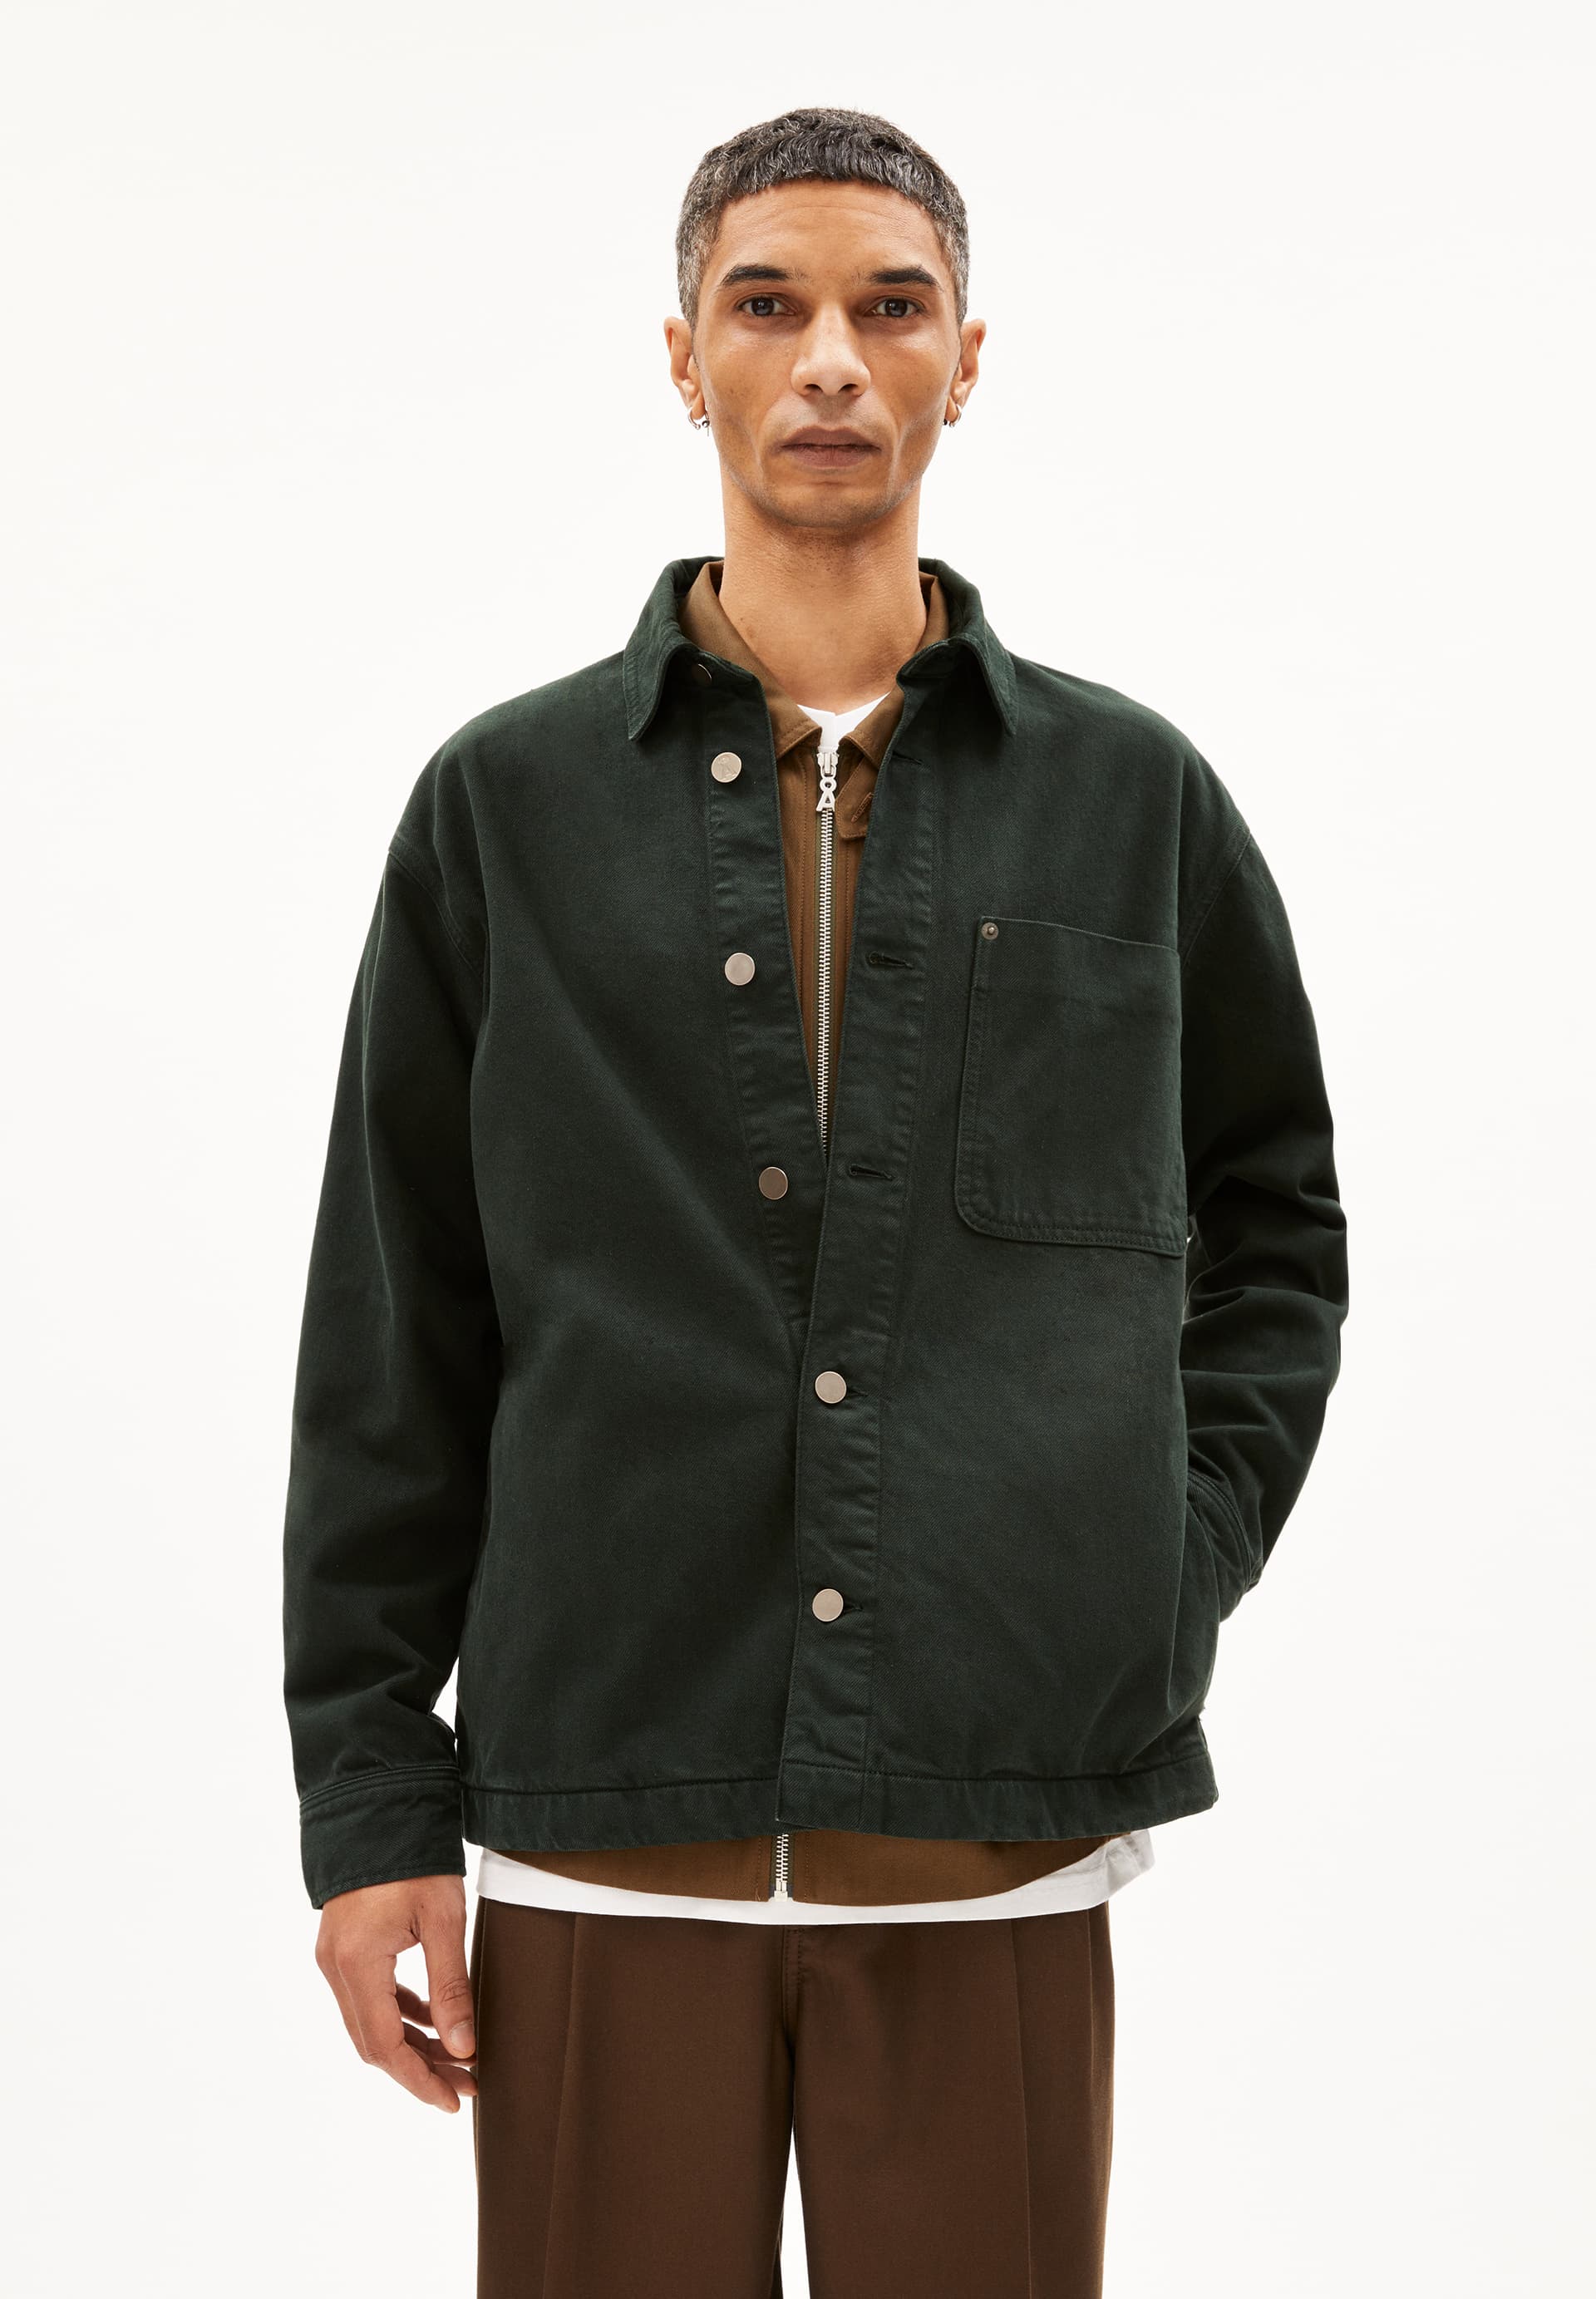 BAASIO GMT DYE Overshirt Relaxed Fit aus recycelter Baumwolle